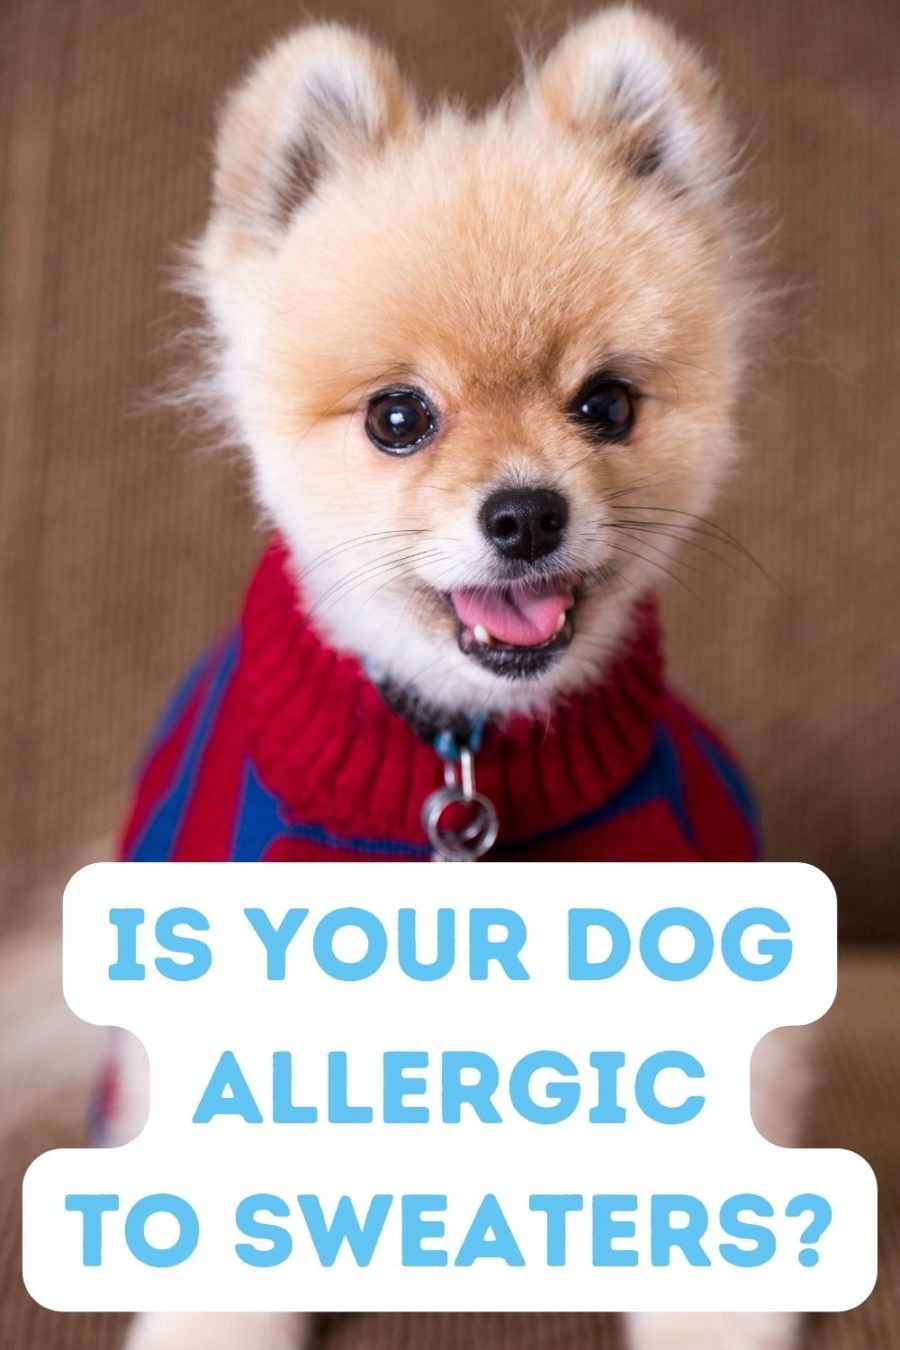 Is your dog allergic to sweaters?